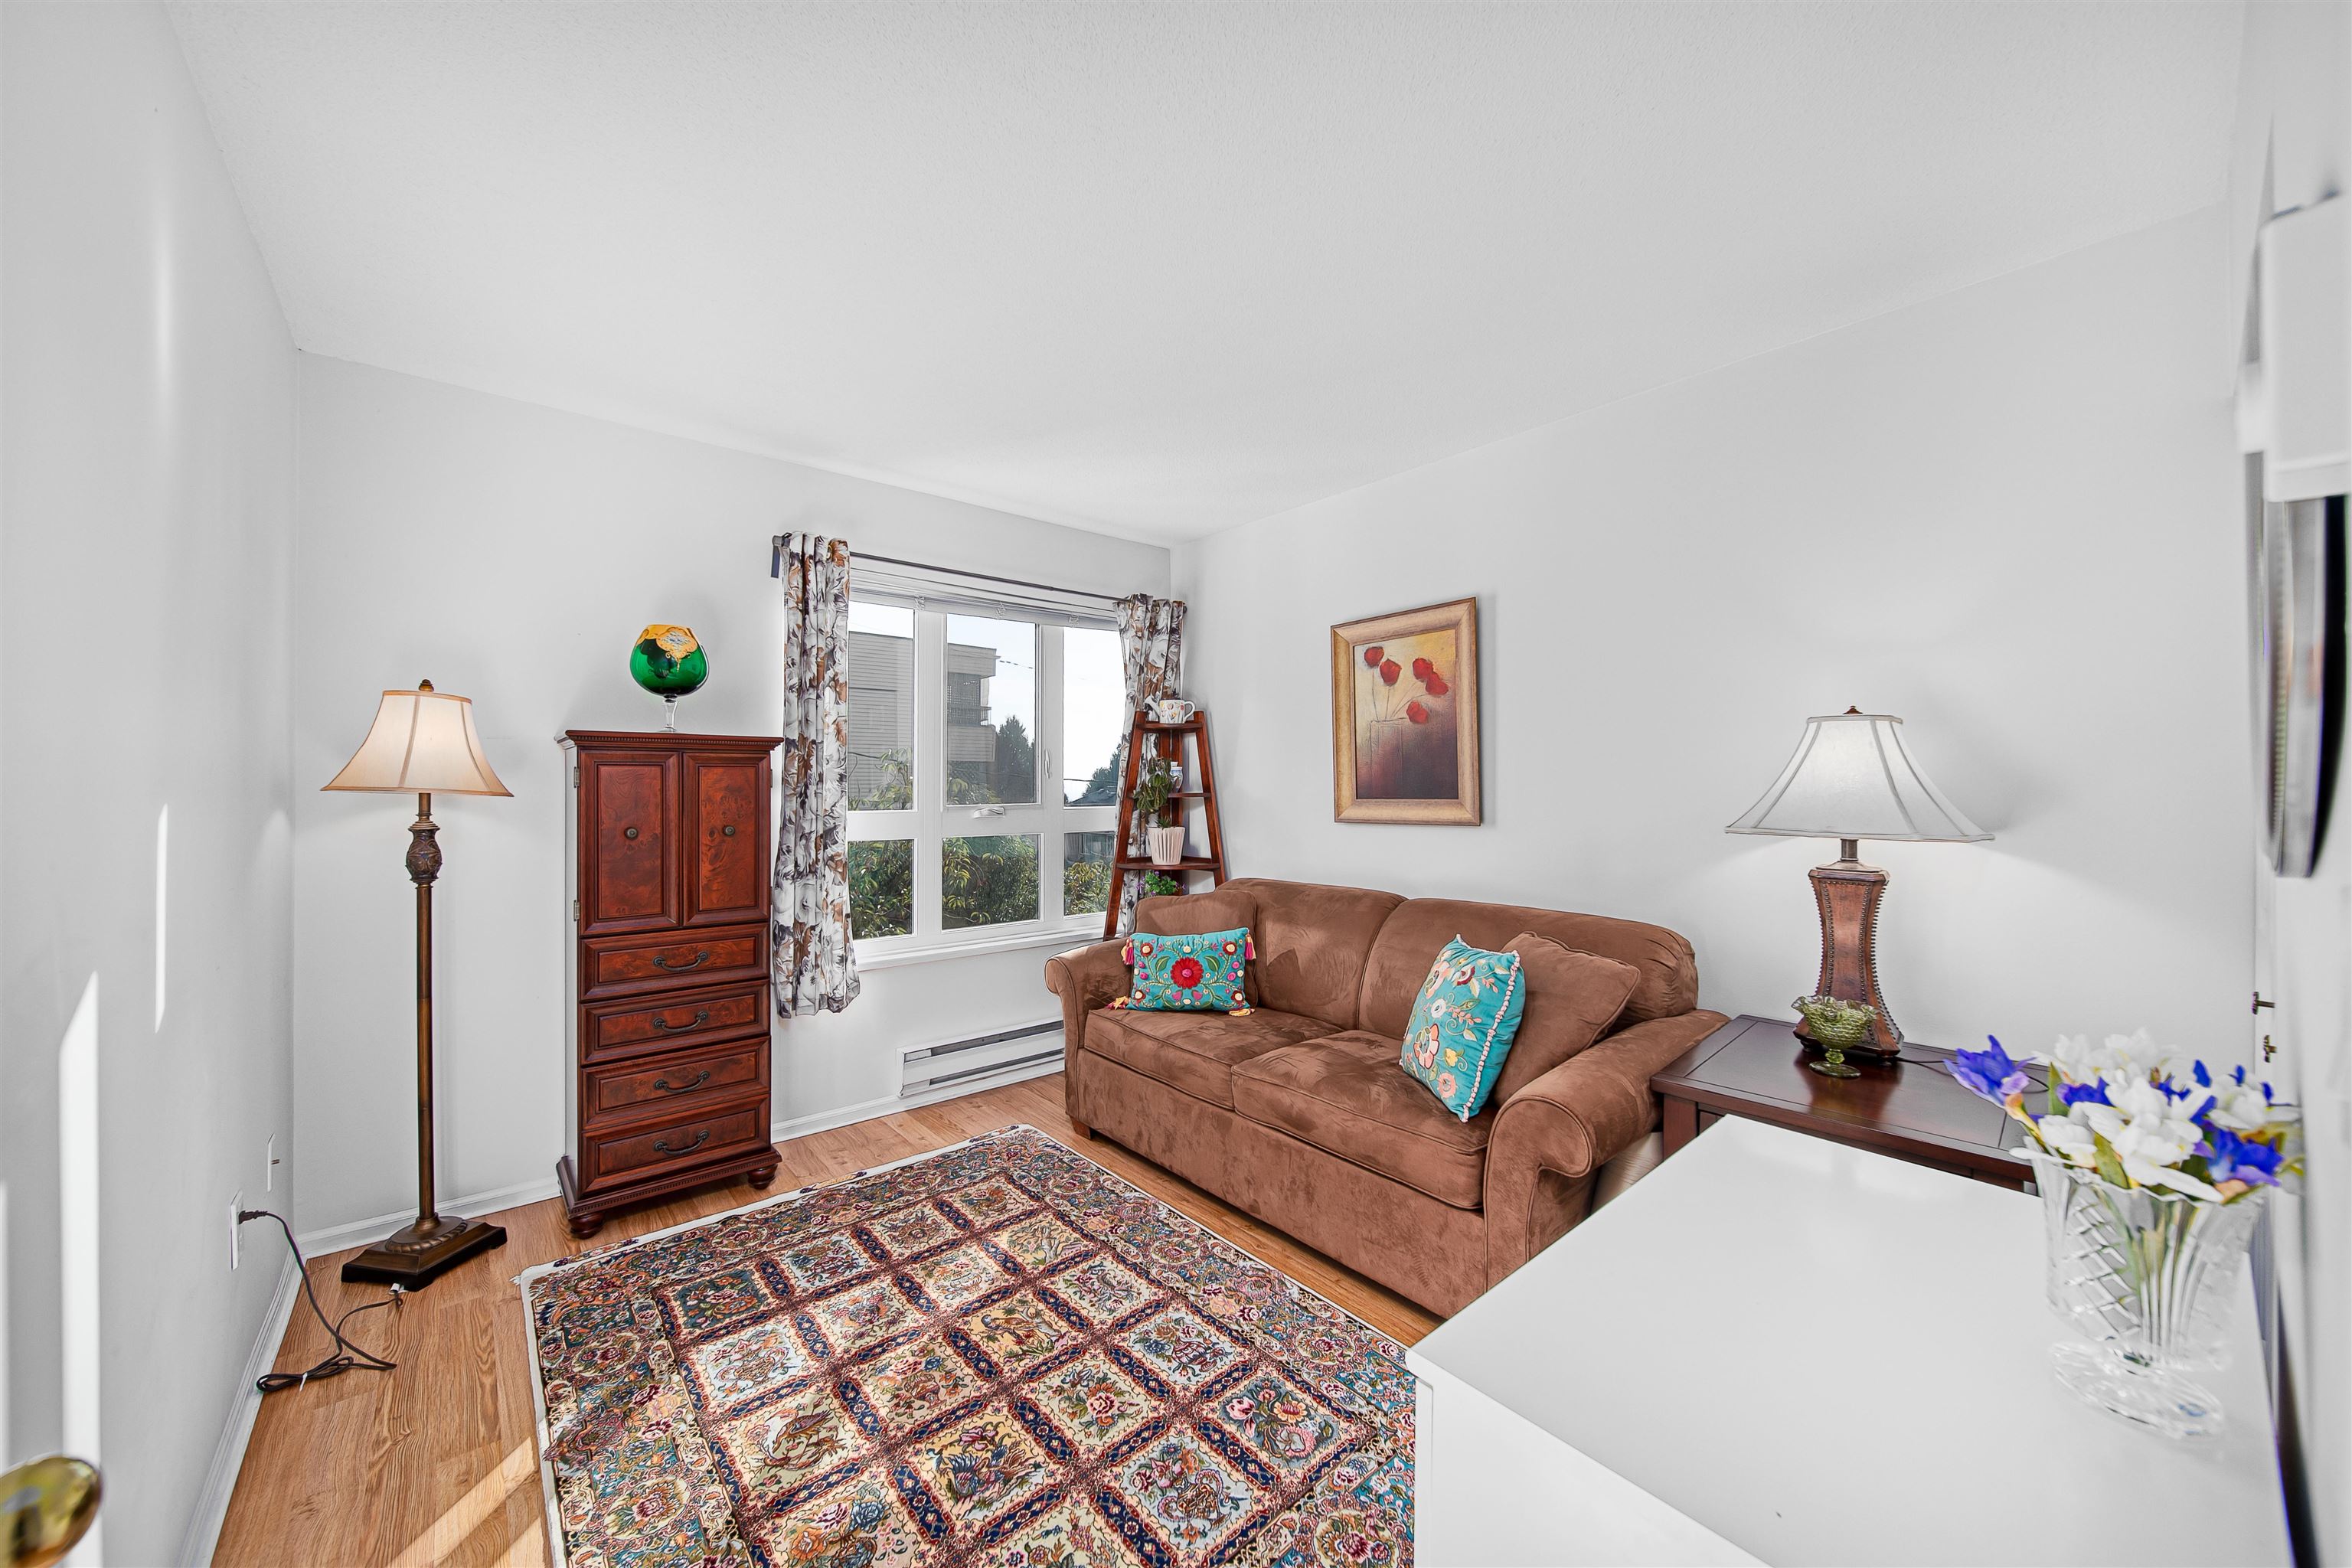 Listing image of 205 106 W KINGS ROAD